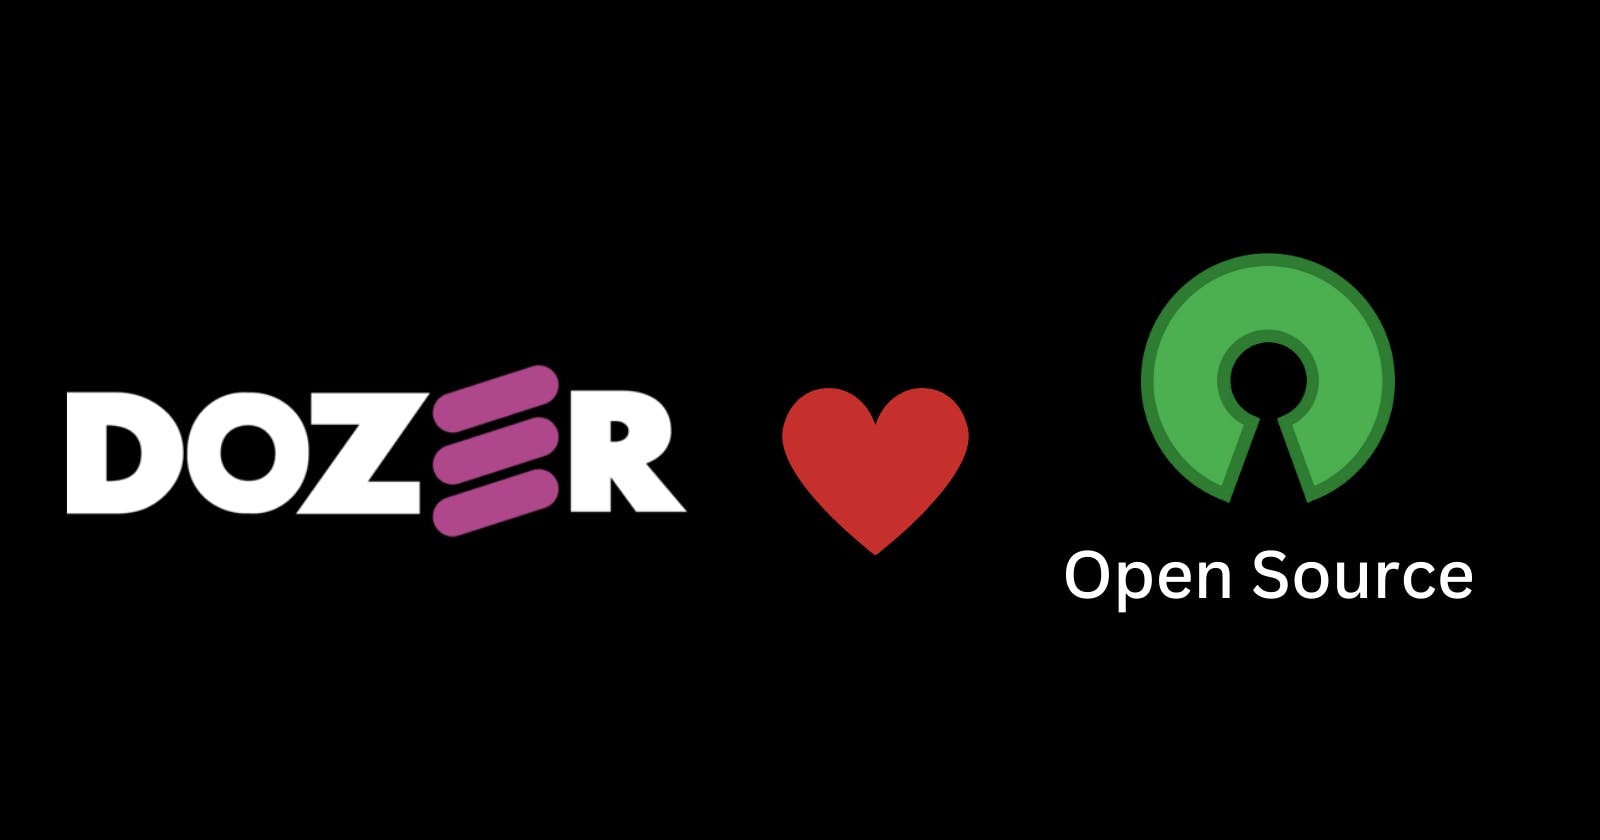 Dozer Goes Open Source: Empowering the Community to Build Real-time Data Apps